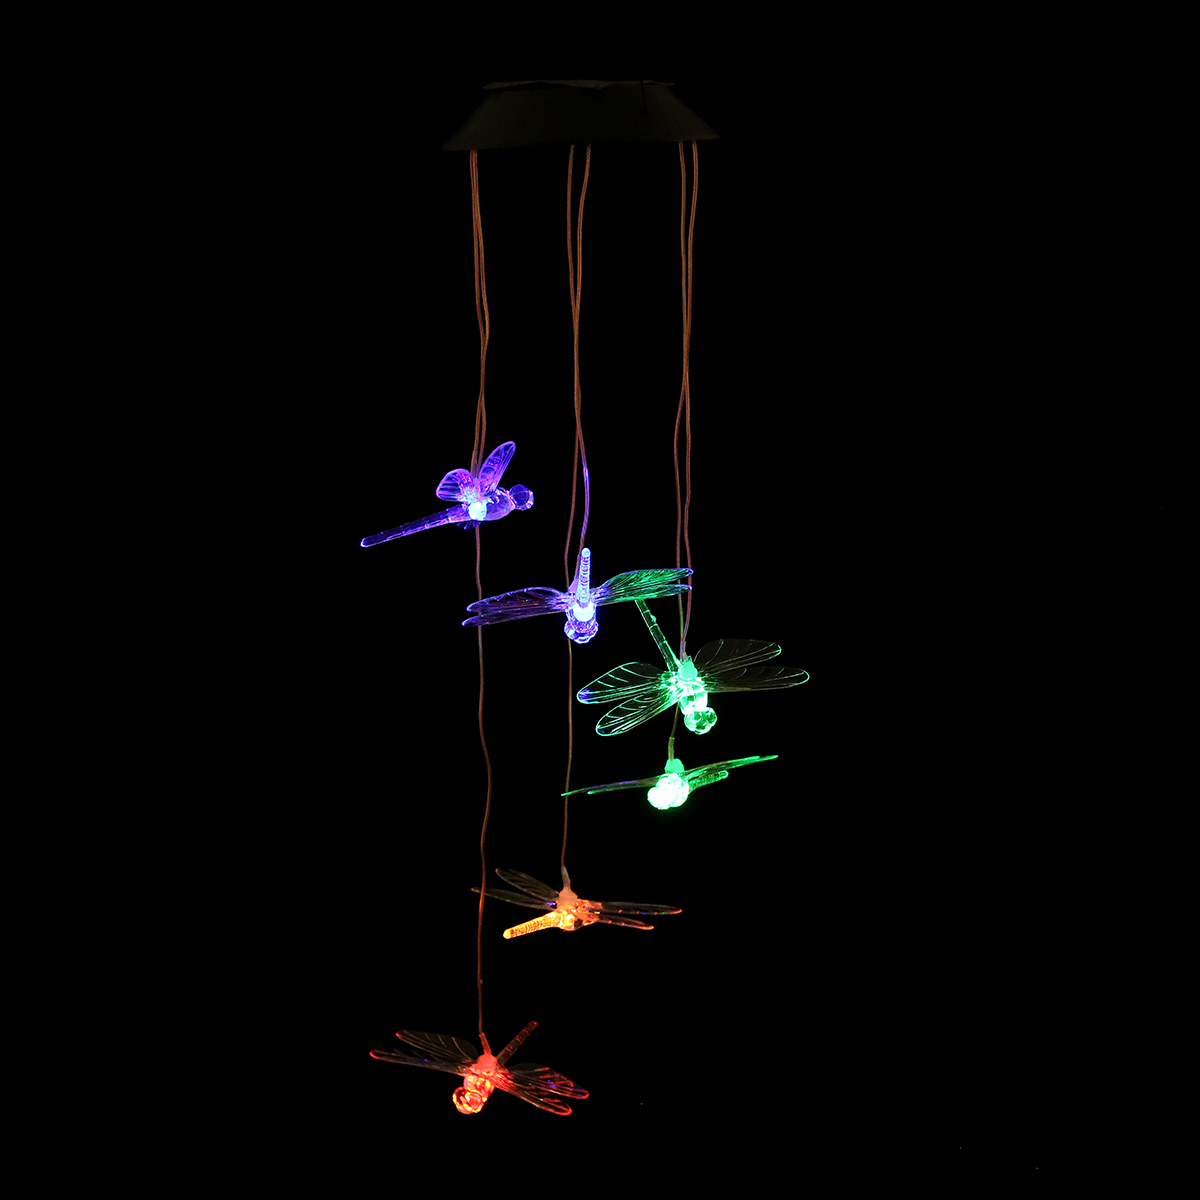 Color-Changing-LED-Solar-Powered-Wind-Chime-Light-Hanging-Garden-Yard-Decor-1760795-5